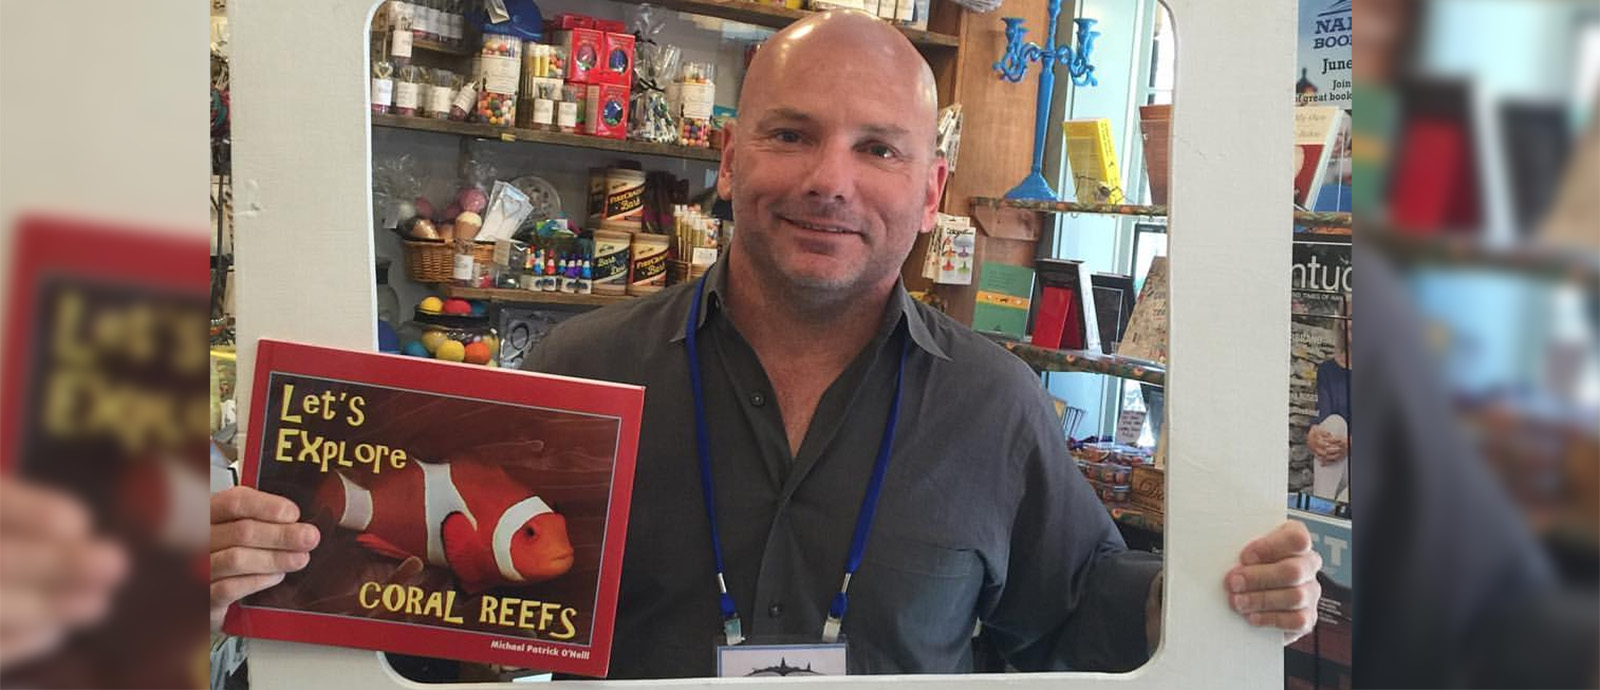 Michael Patrick O’Neill standing in a gift shop holding his book titled Coral Reefs.